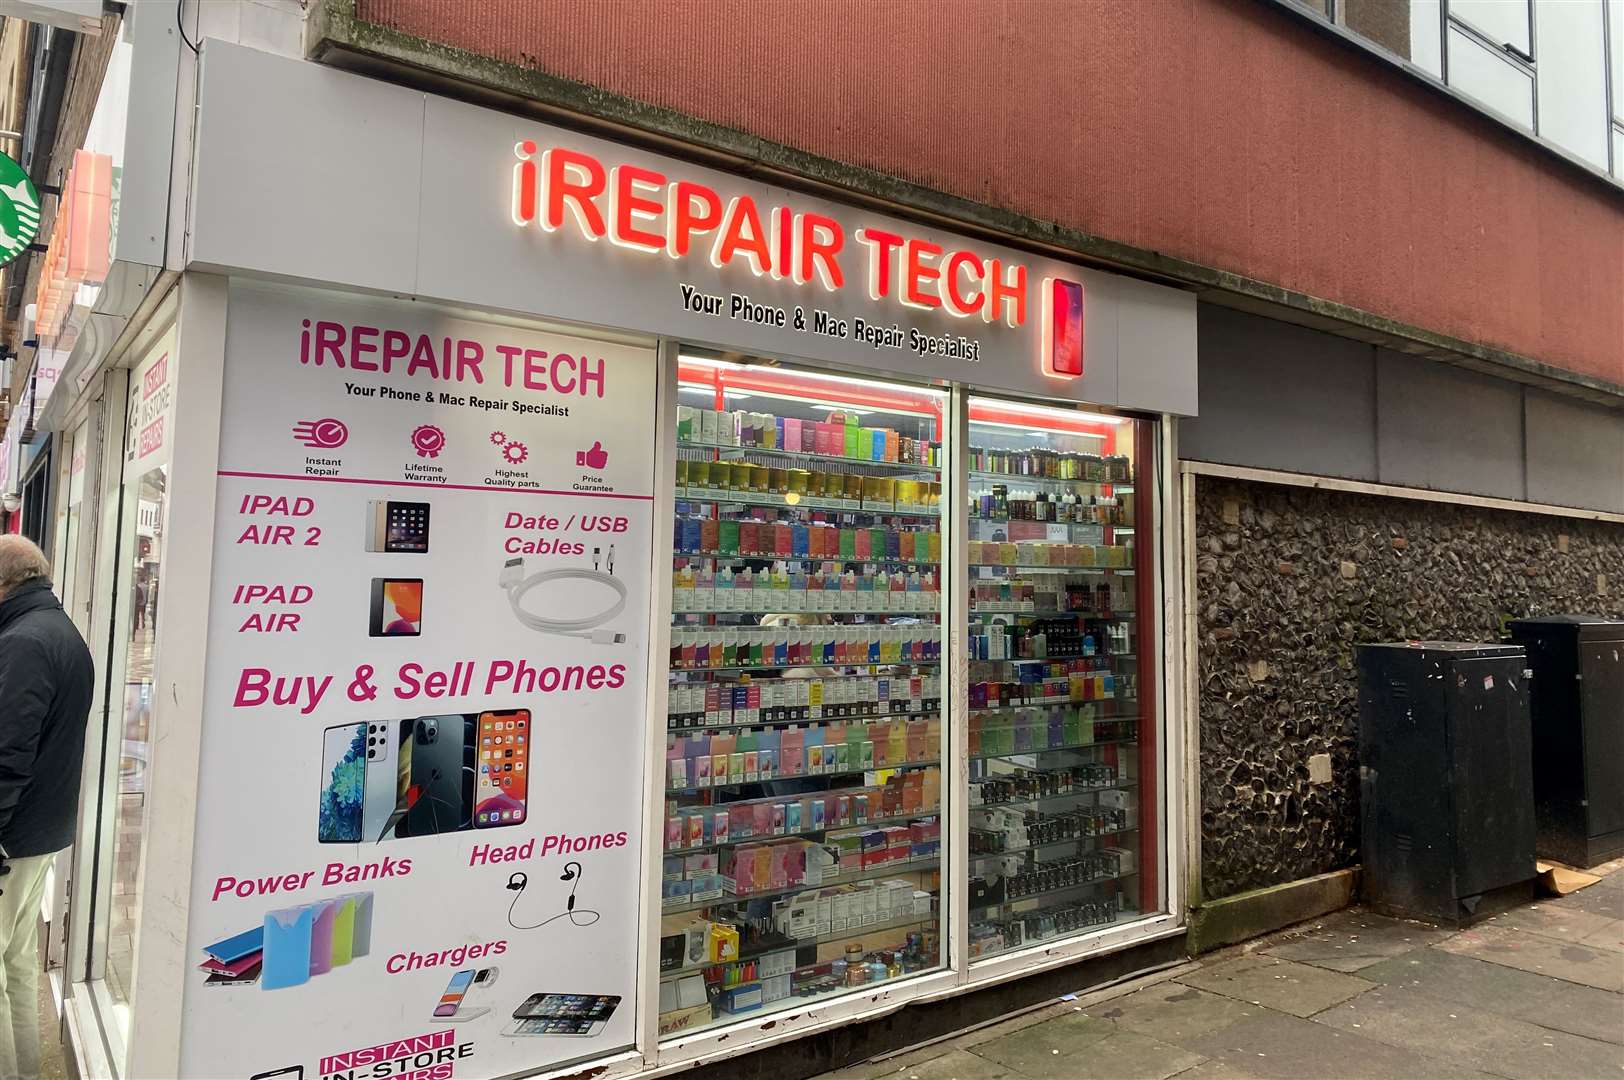 Muharram Qumri, who manages iRepair Tech, says the new policy would cut his shop’s revenue by as much as 30%